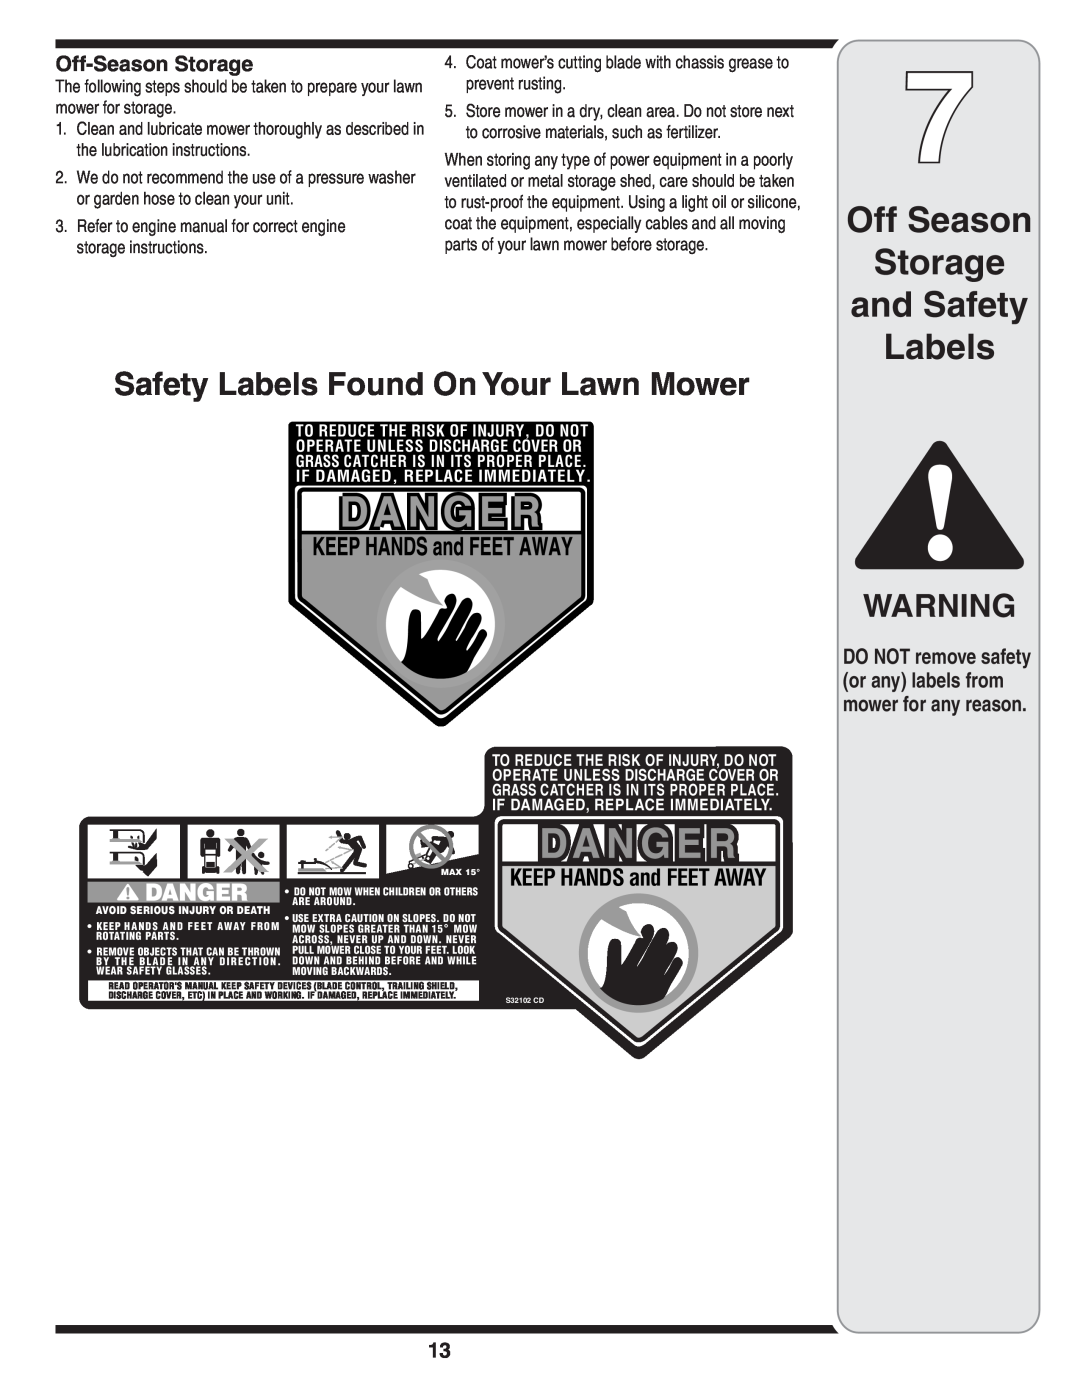 MTD V560 warranty Off Season Storage and Safety Labels, Safety Labels Found On Your Lawn Mower, KEEP HANDS and FEET AWAY 